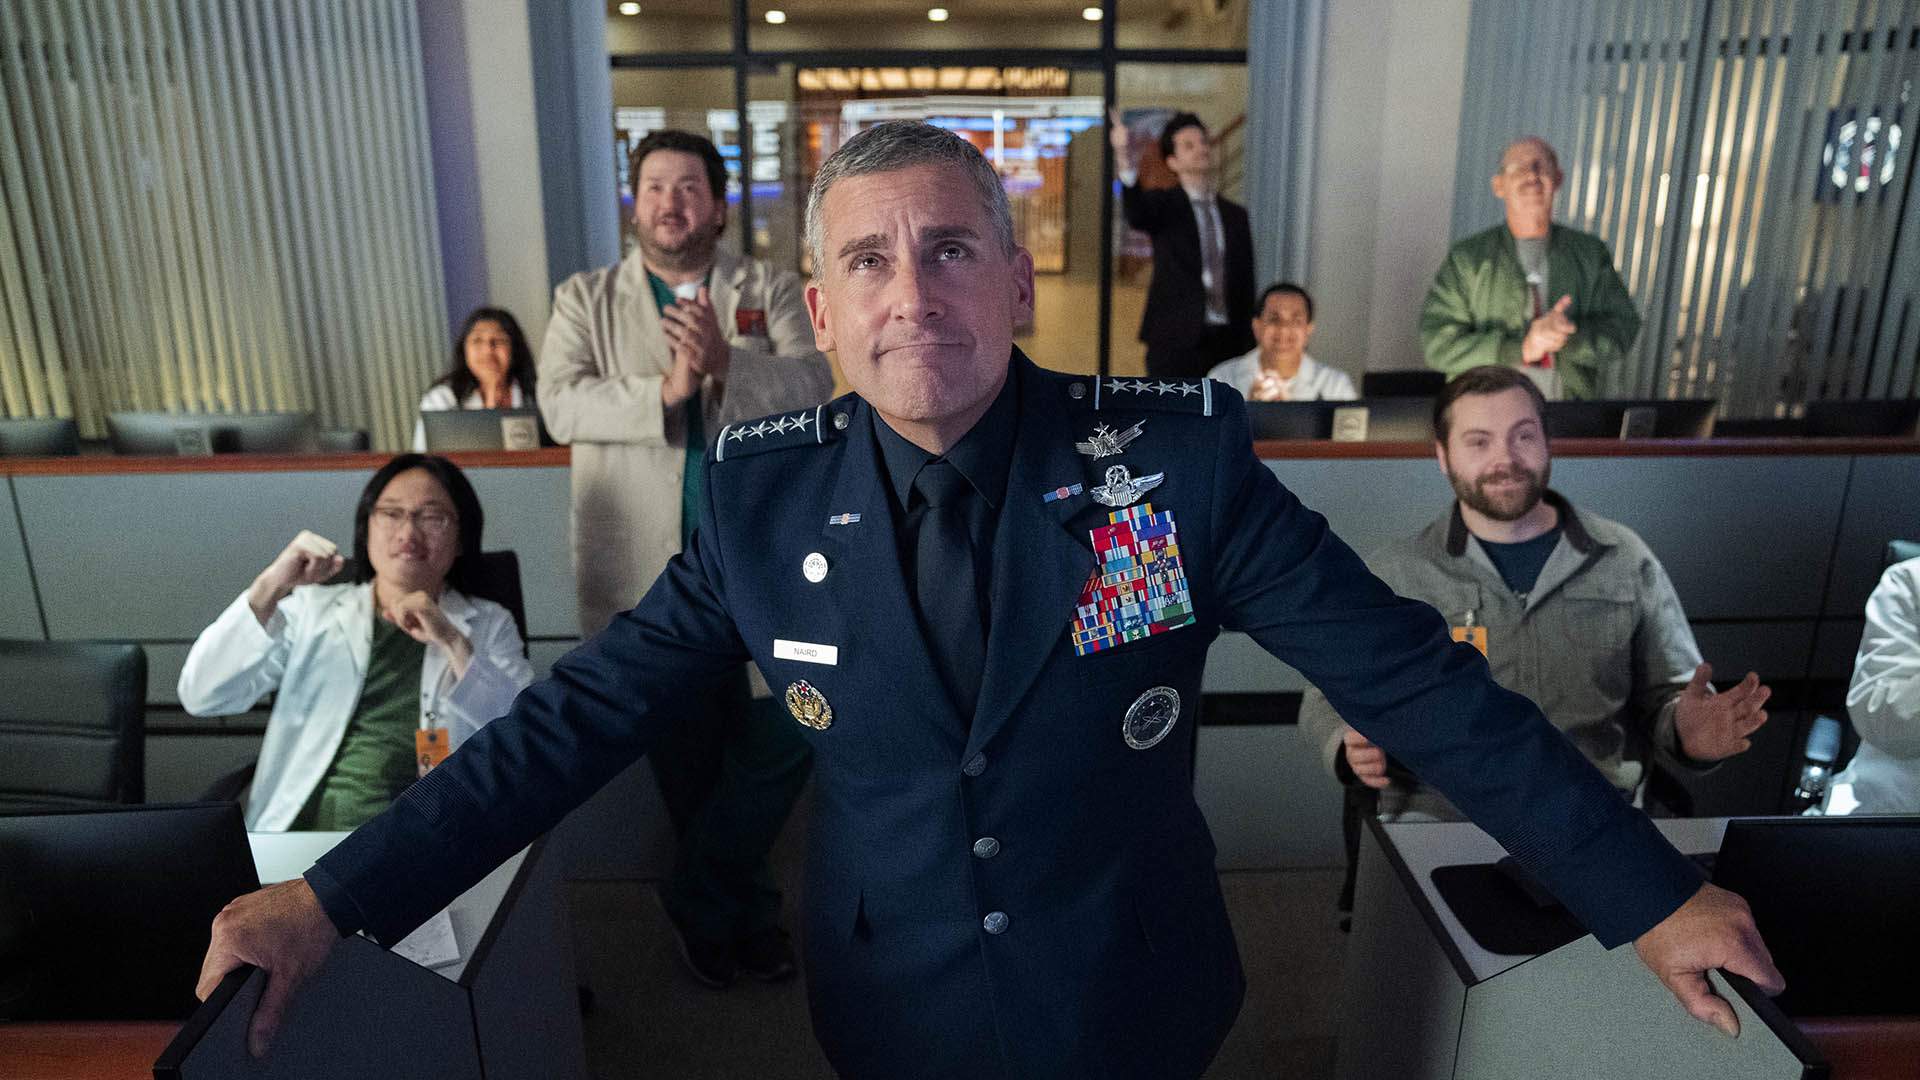 Steve Carell Takes Charge of Another Workplace in the Trailer for Netflix Sitcom 'Space Force'